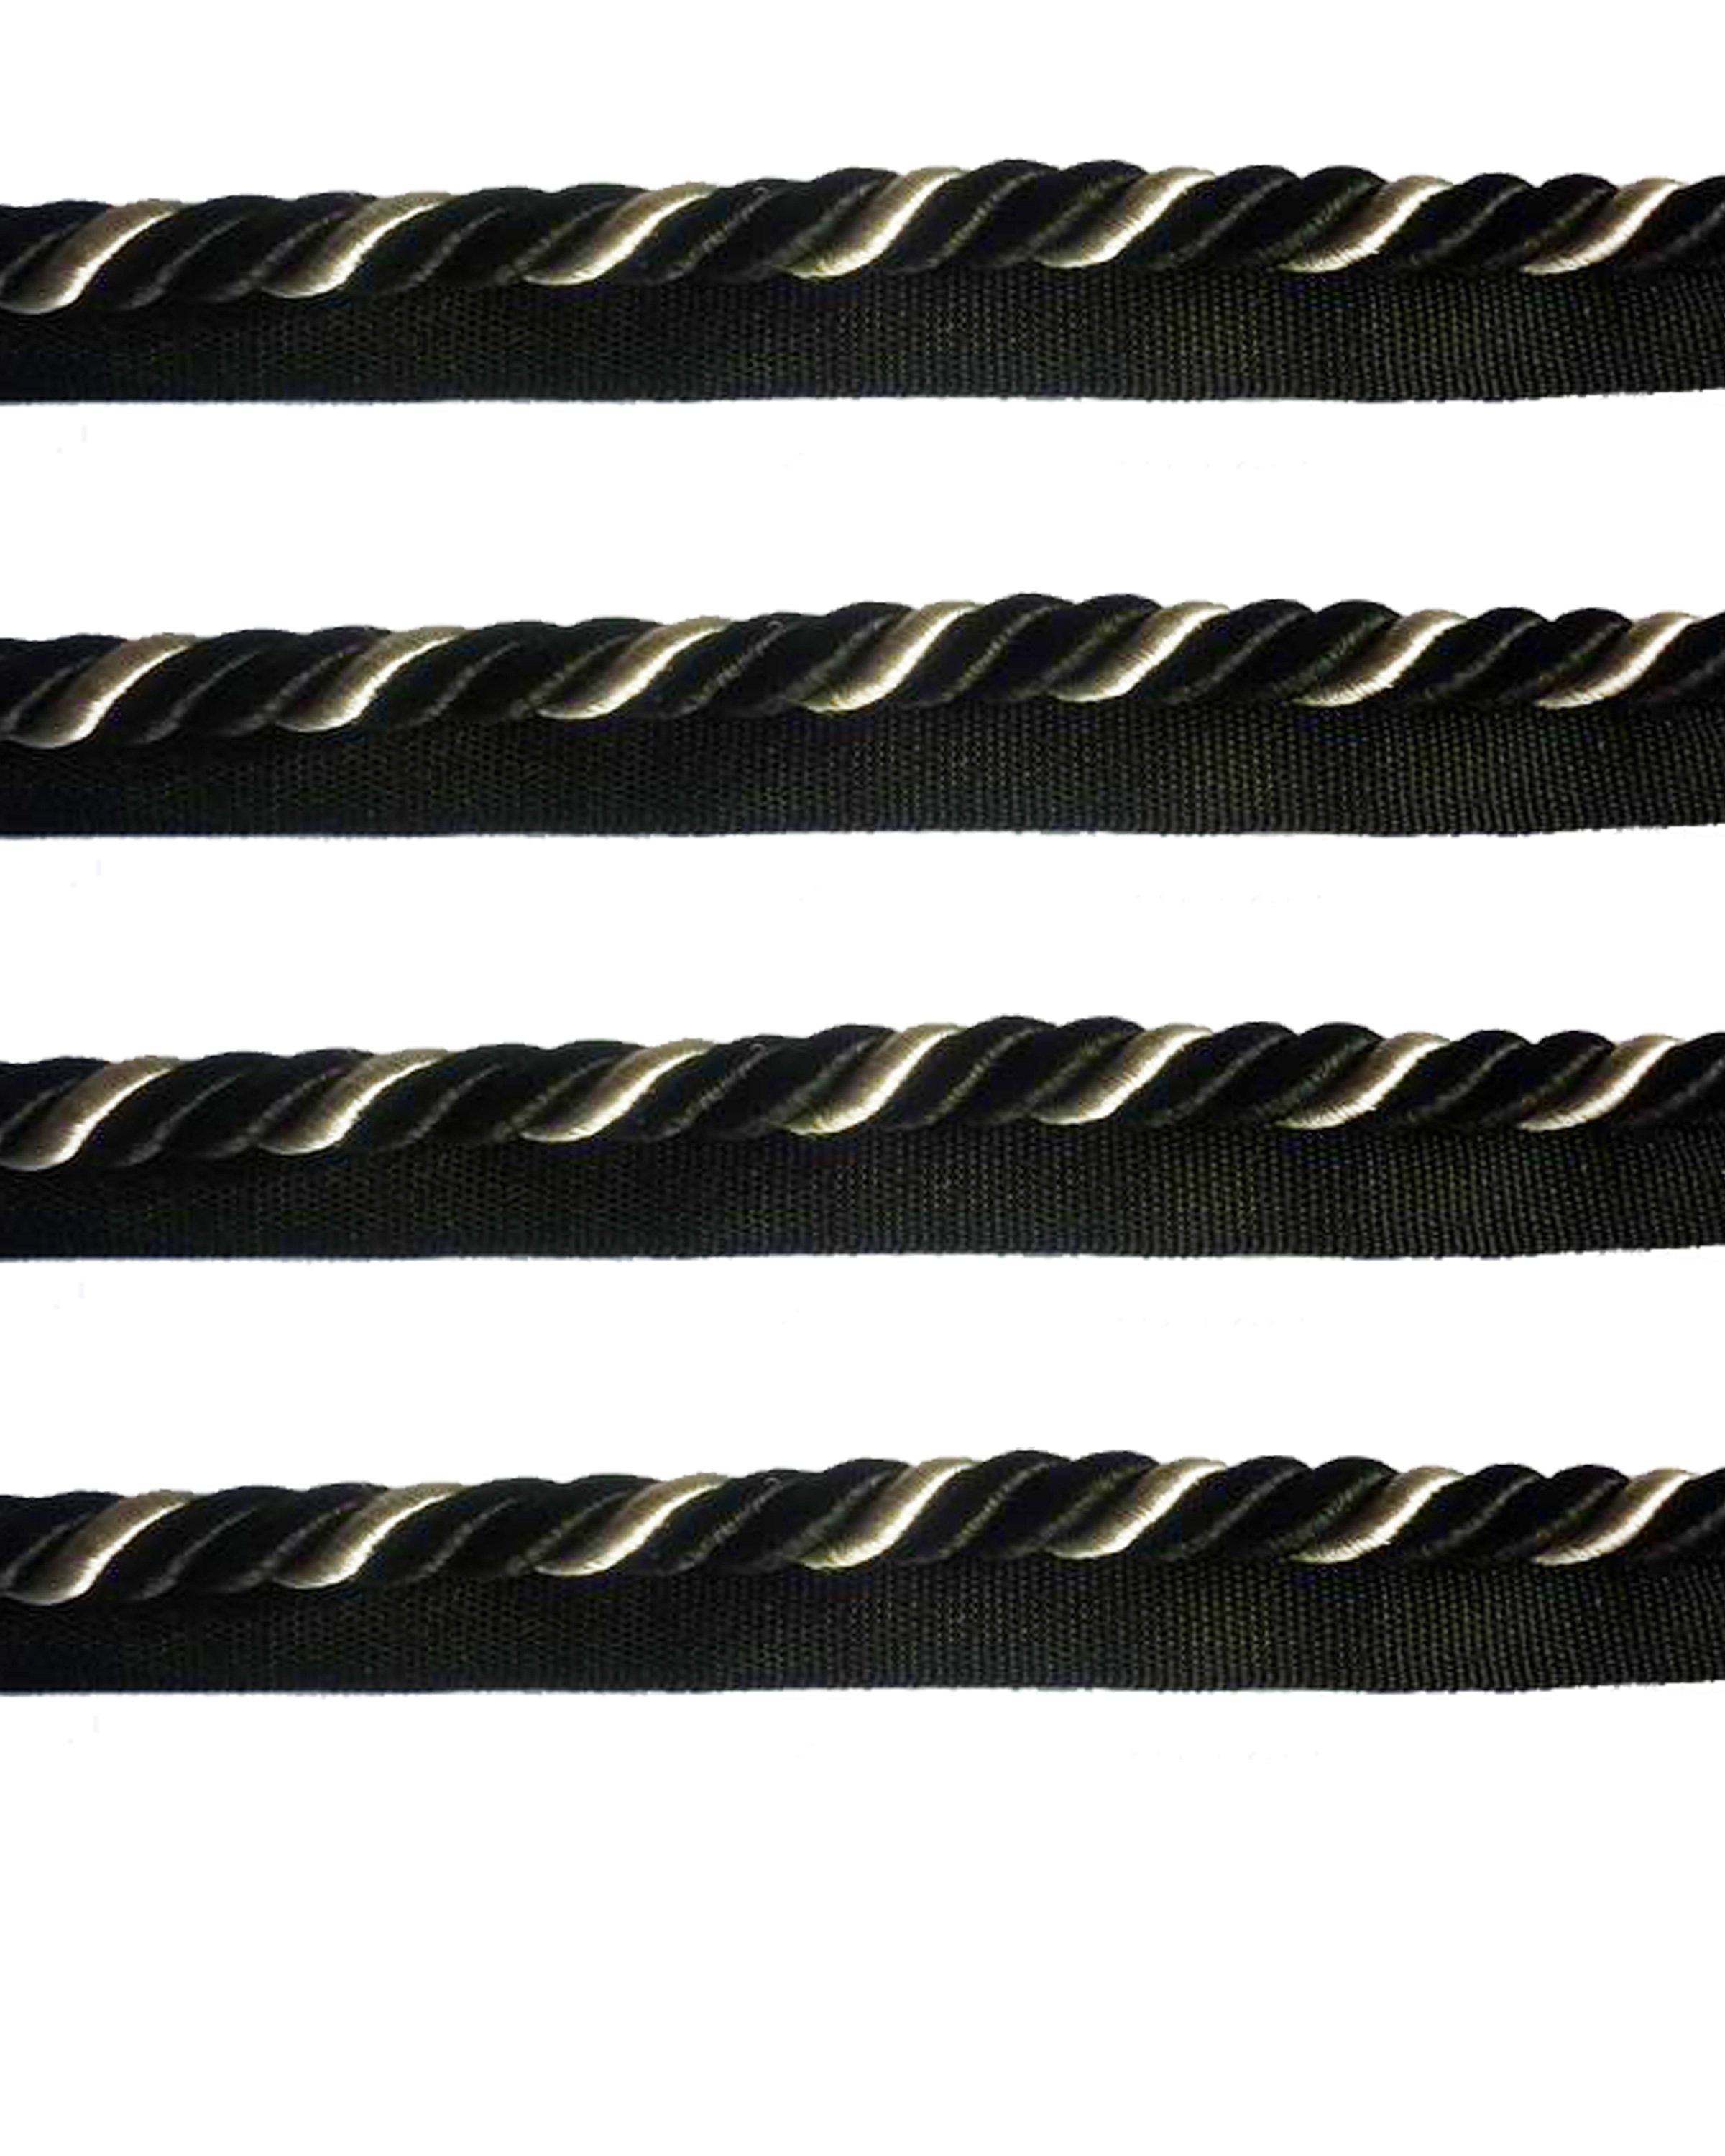 Piping Cord 8mm 2 Tone Twist on Tape - Black Silver Price is for 5 metres